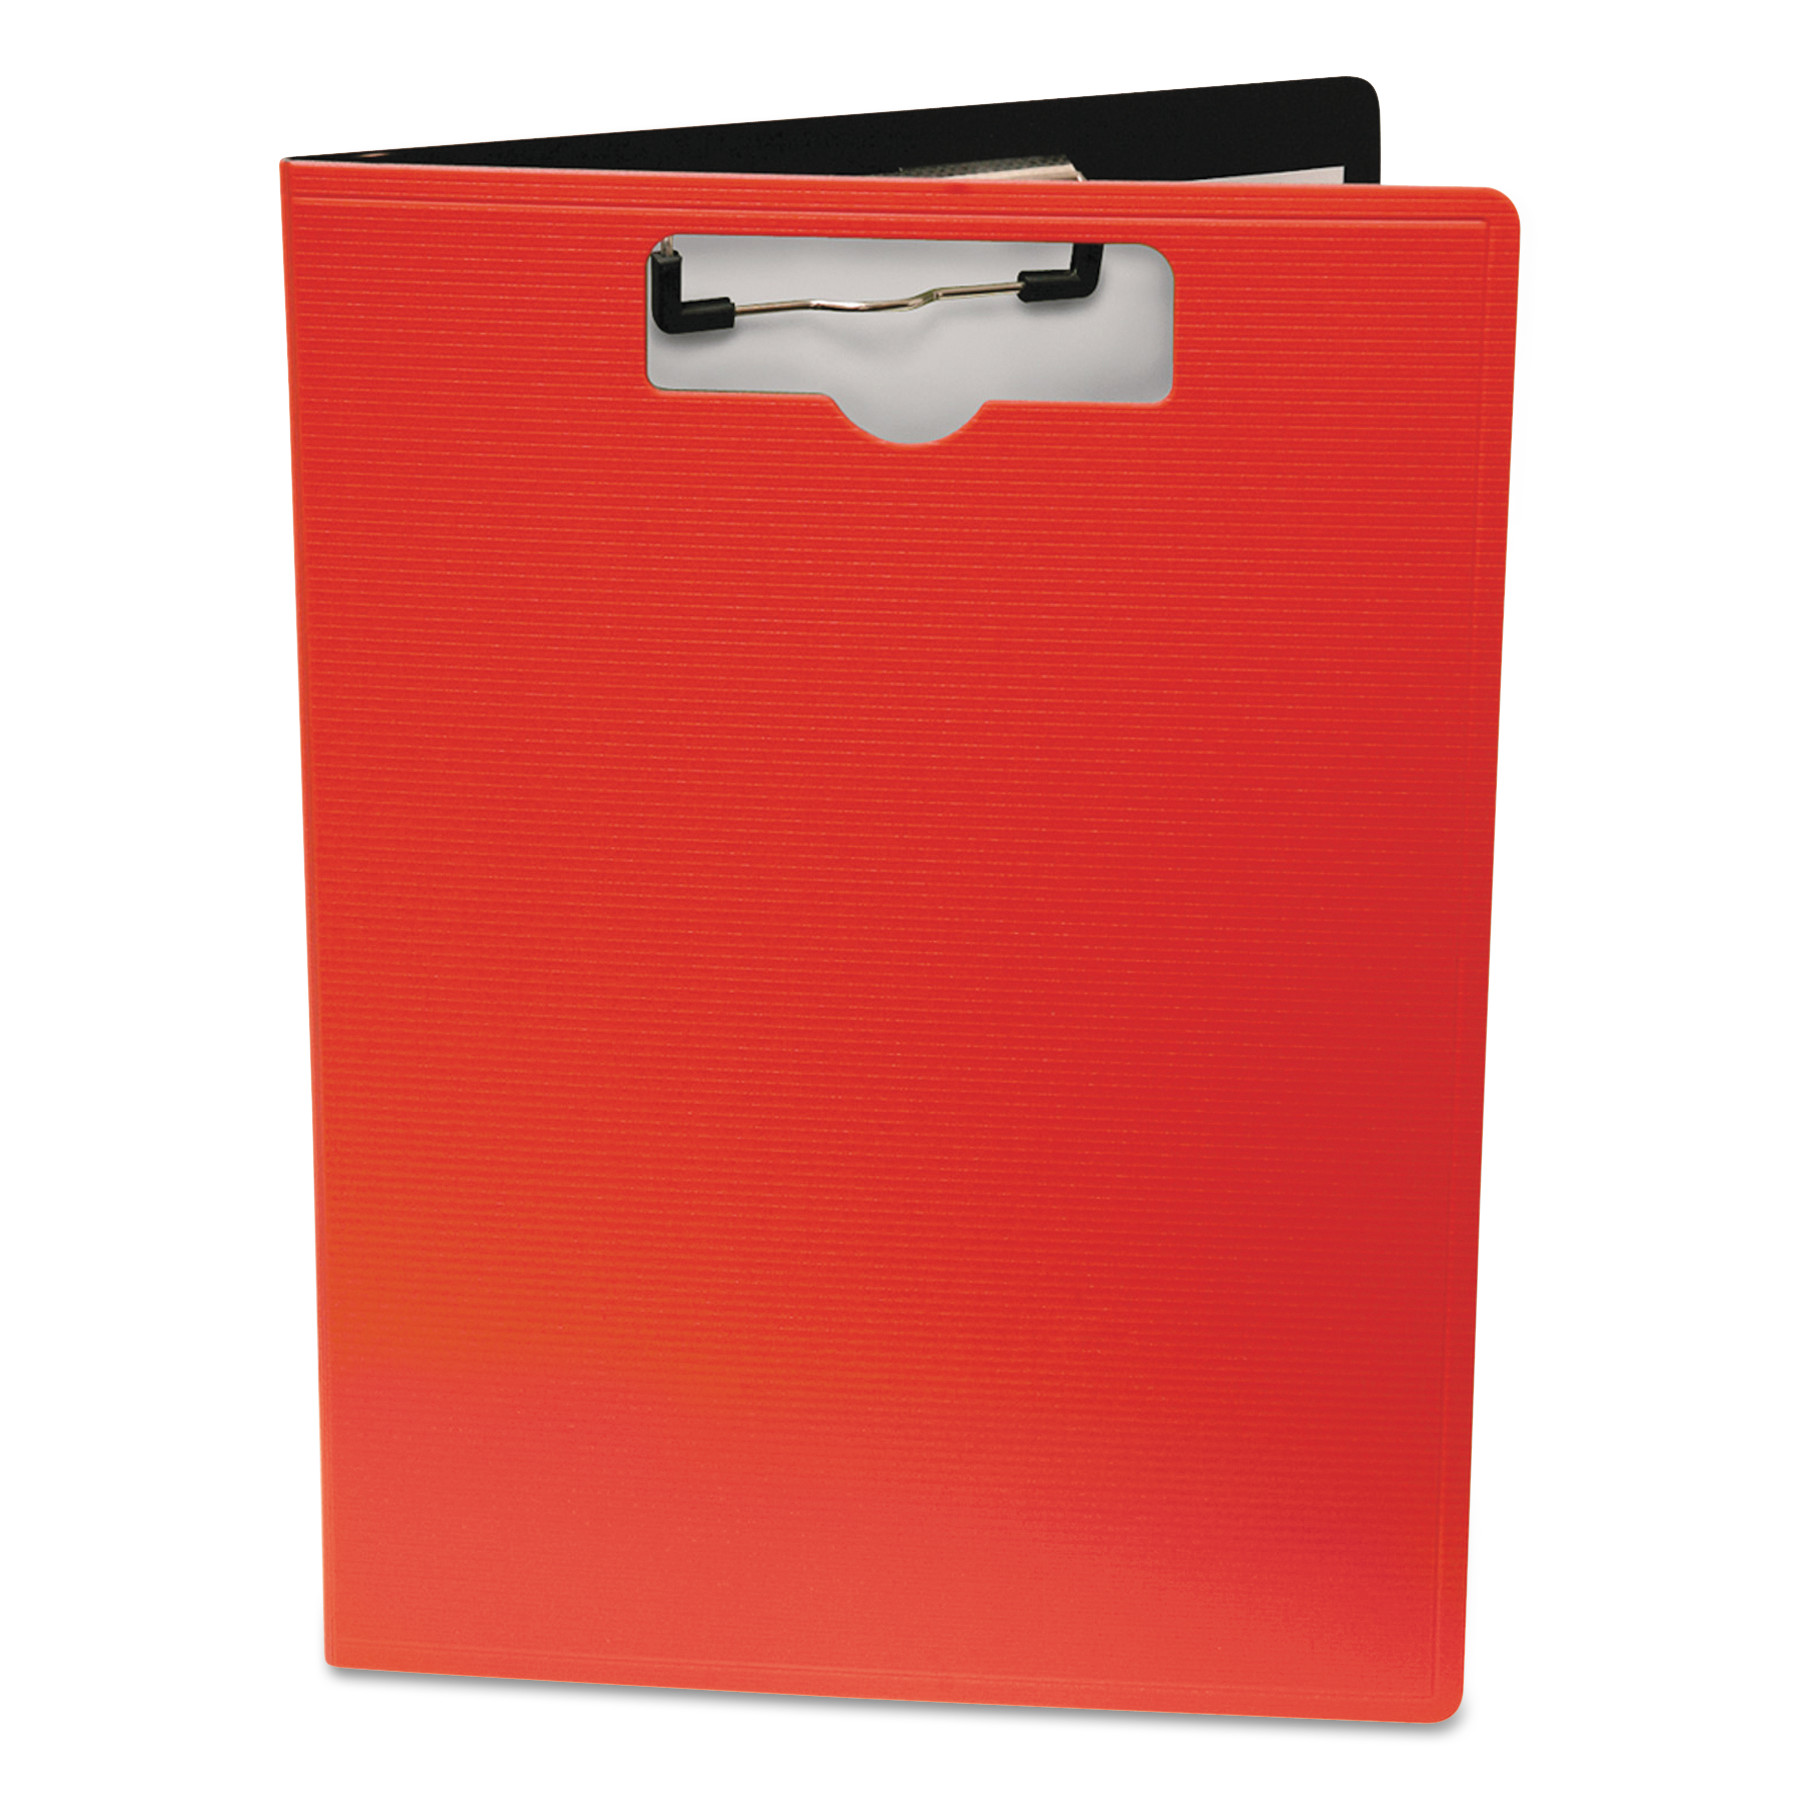  Mobile OPS 61632 Portfolio Clipboard With Low-Profile Clip, 1/2 Capacity, 8 1/2 x 11, Red (BAU61632) 